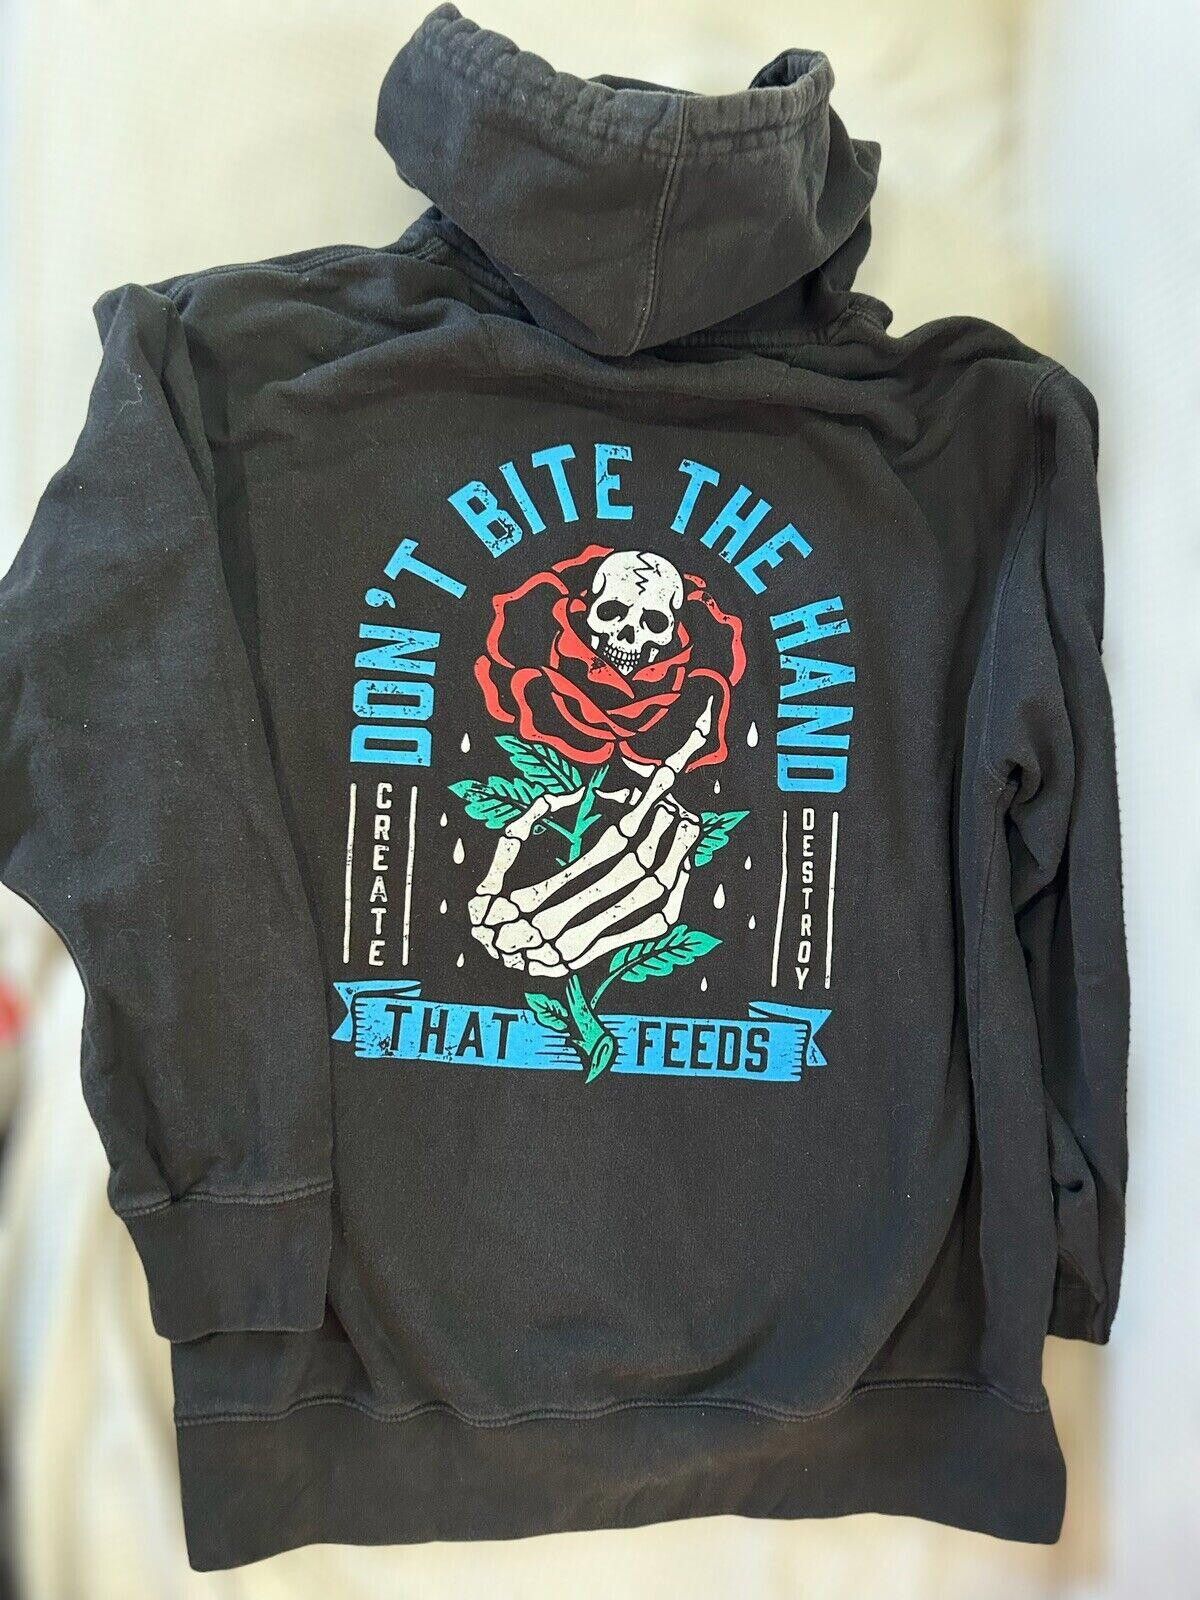 Designer SCW don’t Bite The Hand That Feeds You Medium Hoodie Size US 32 / EU 48 - 1 Preview